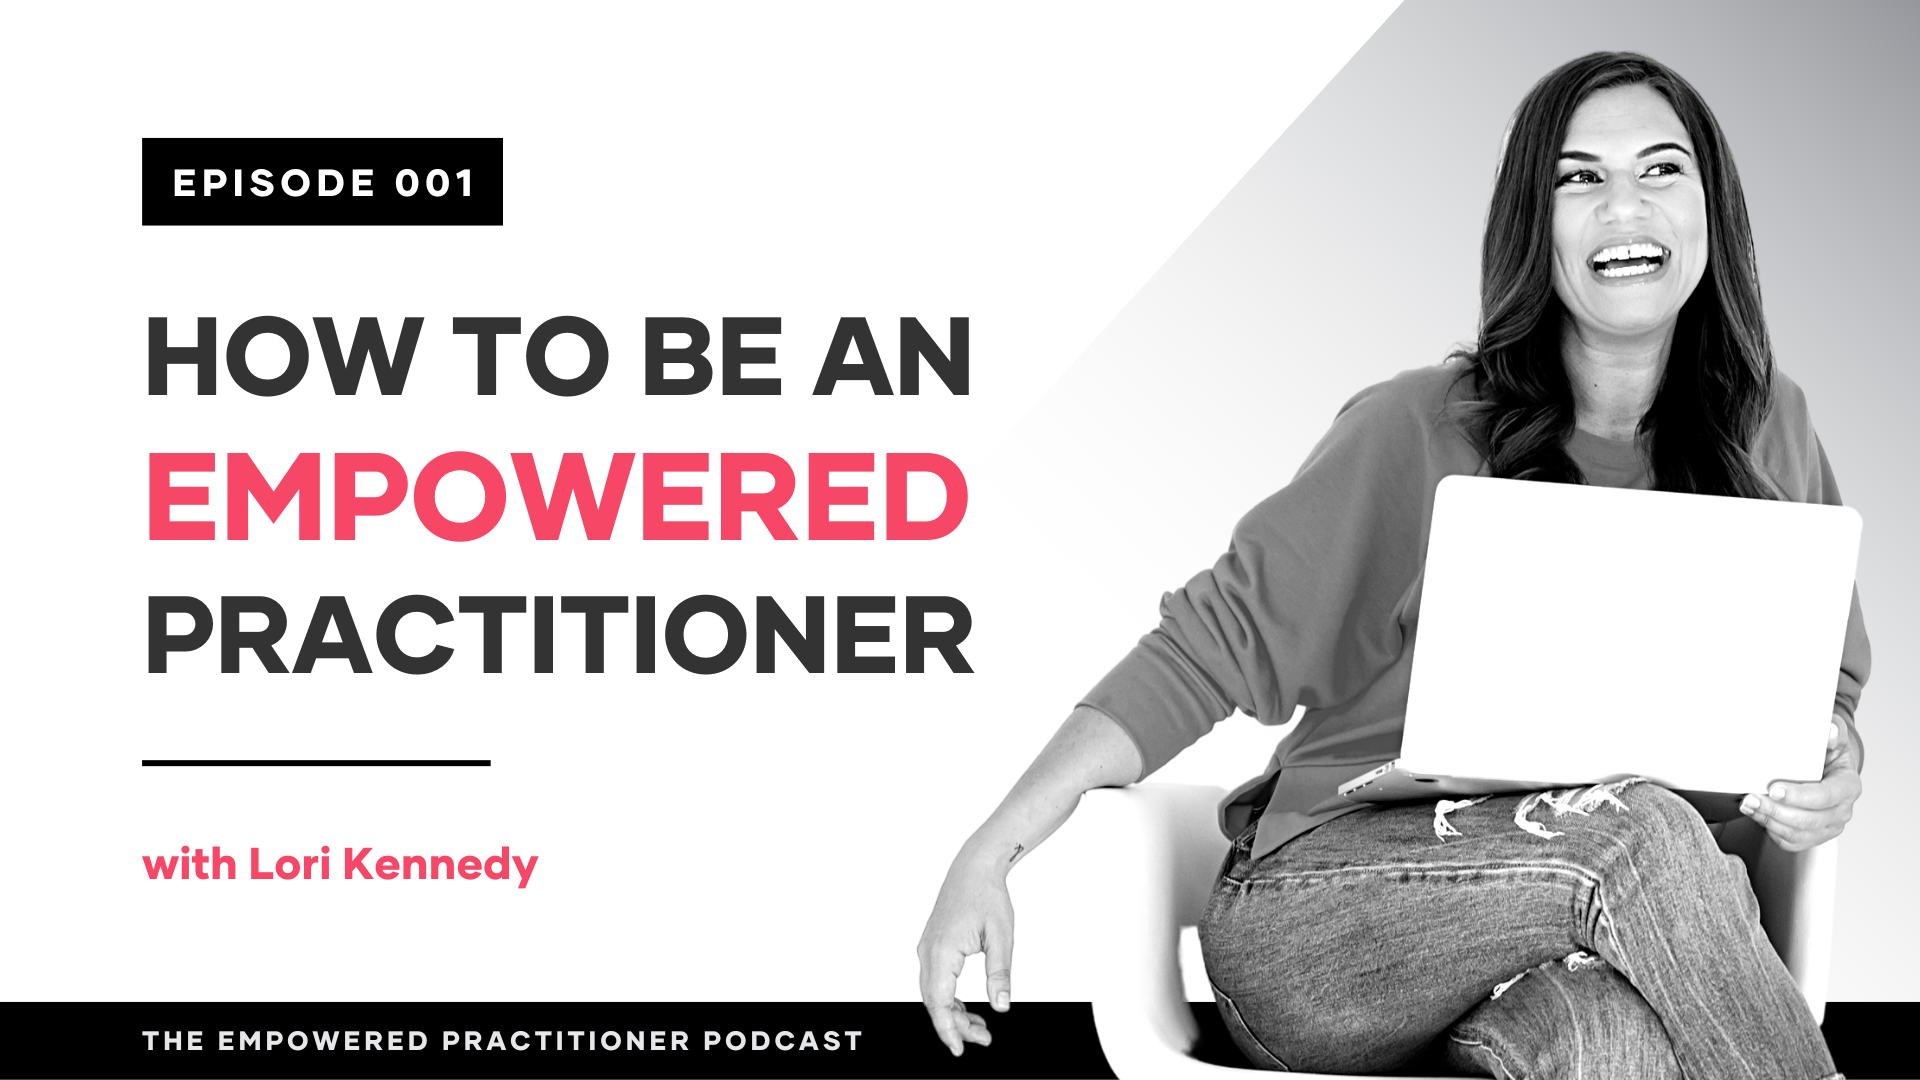 Episode 001 - How to become an empowered practitioner